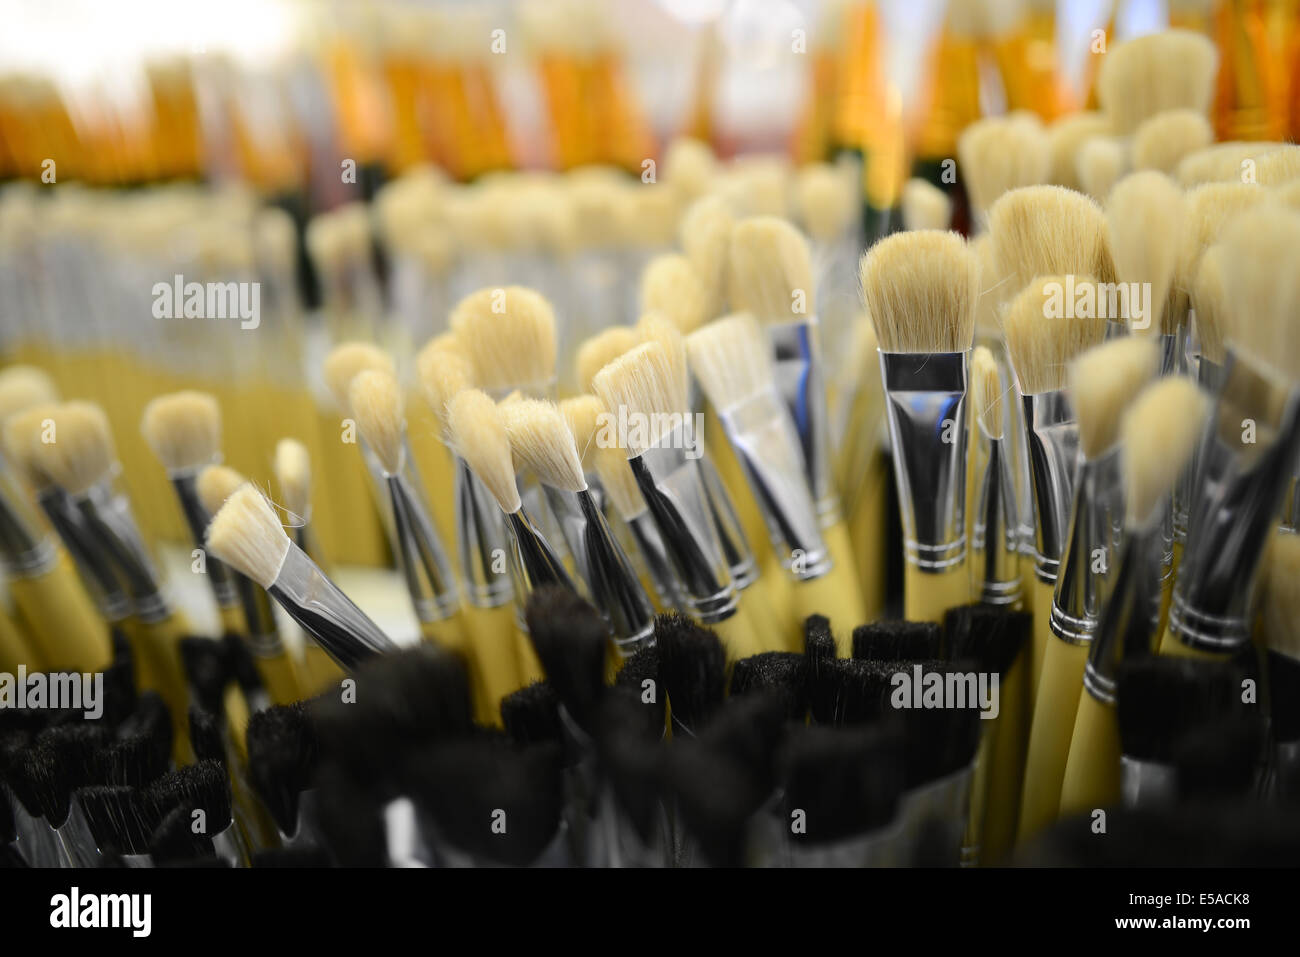 new brushes in a shelf Stock Photo